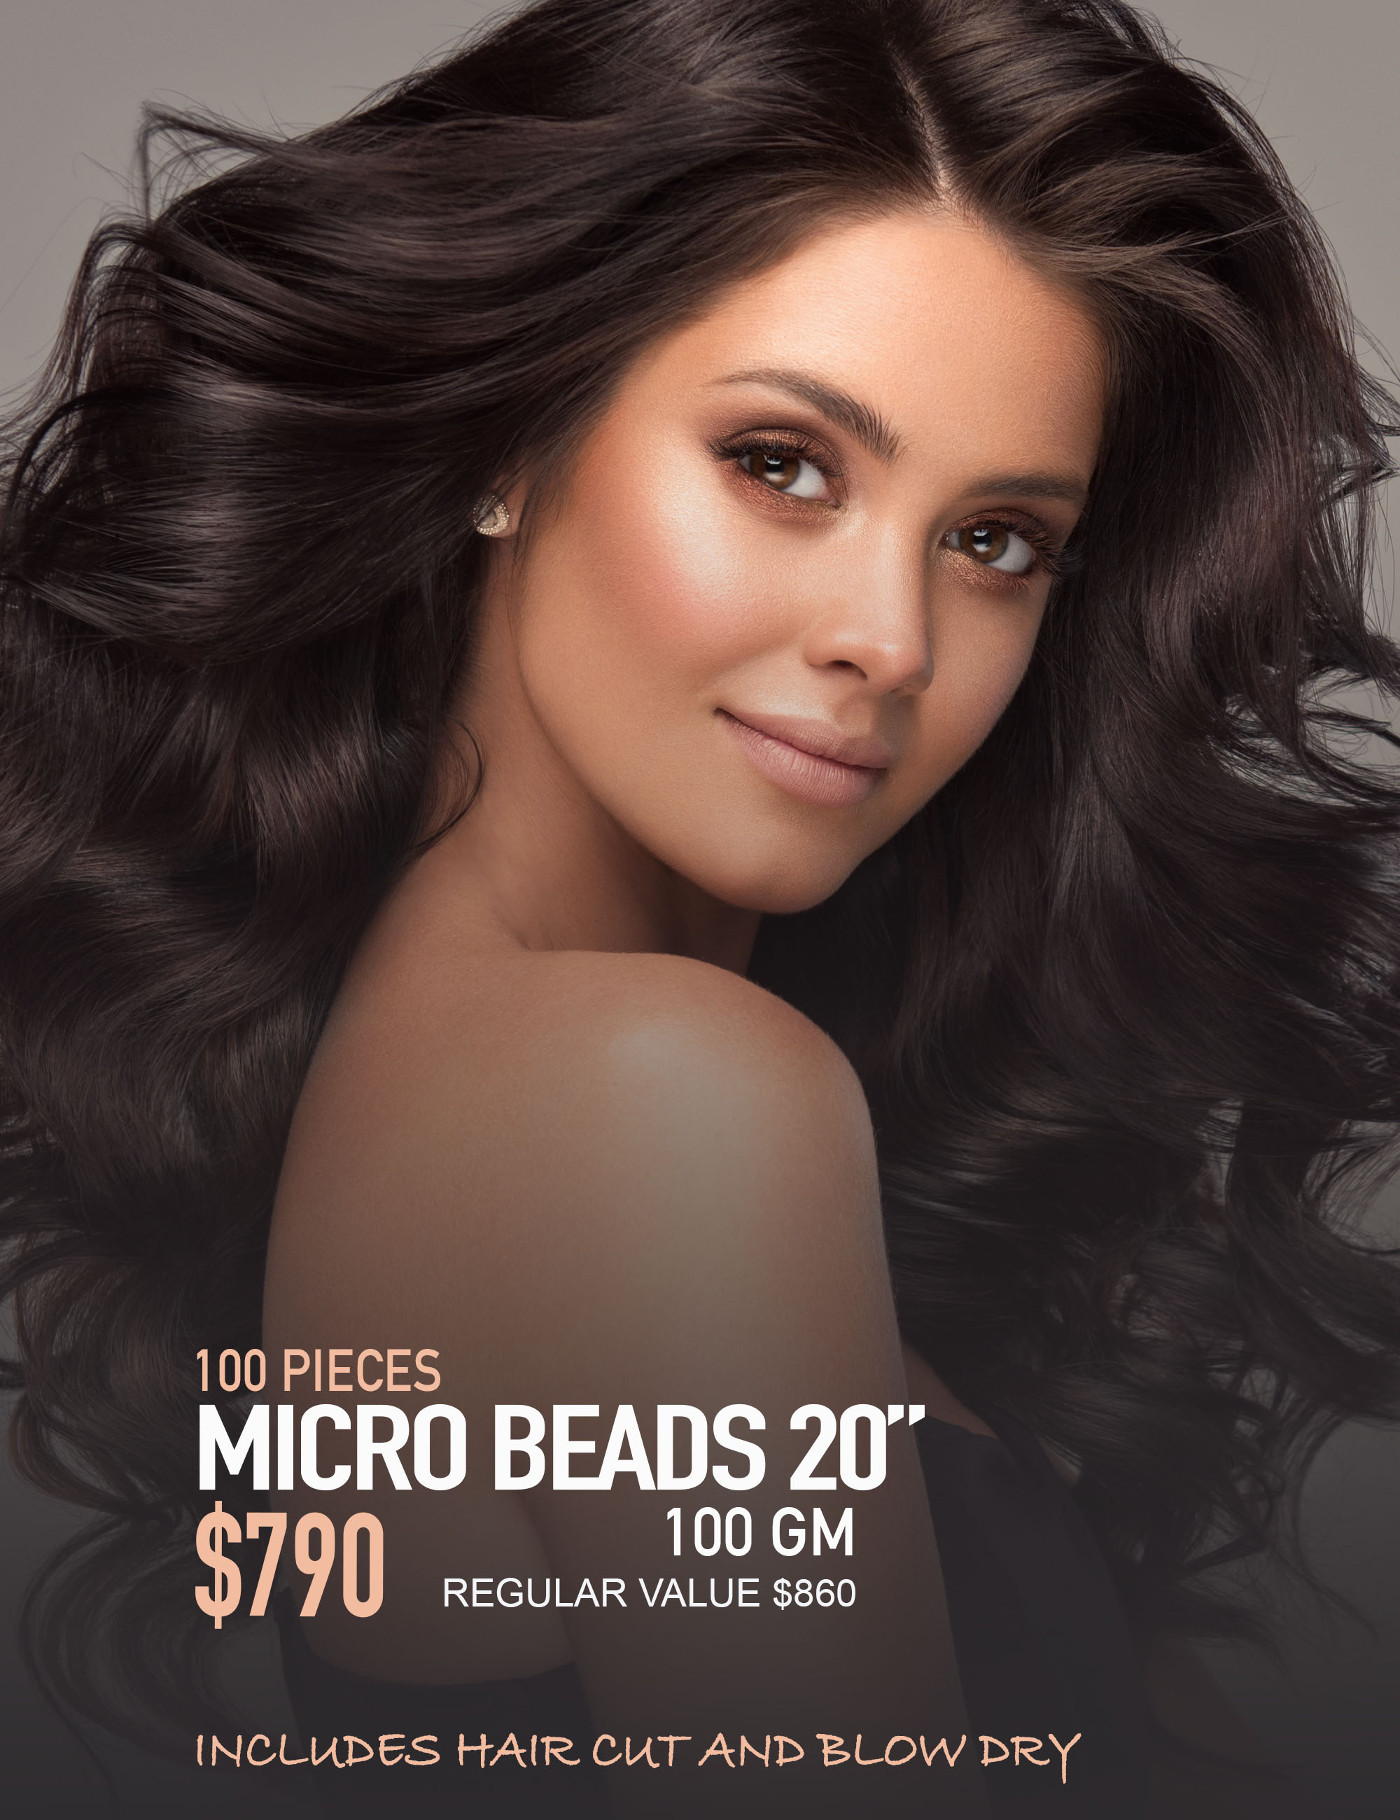 100 pieces micro beads Hair Extensions, Include hair cut and blow dry, gift with this service, kit argan oil